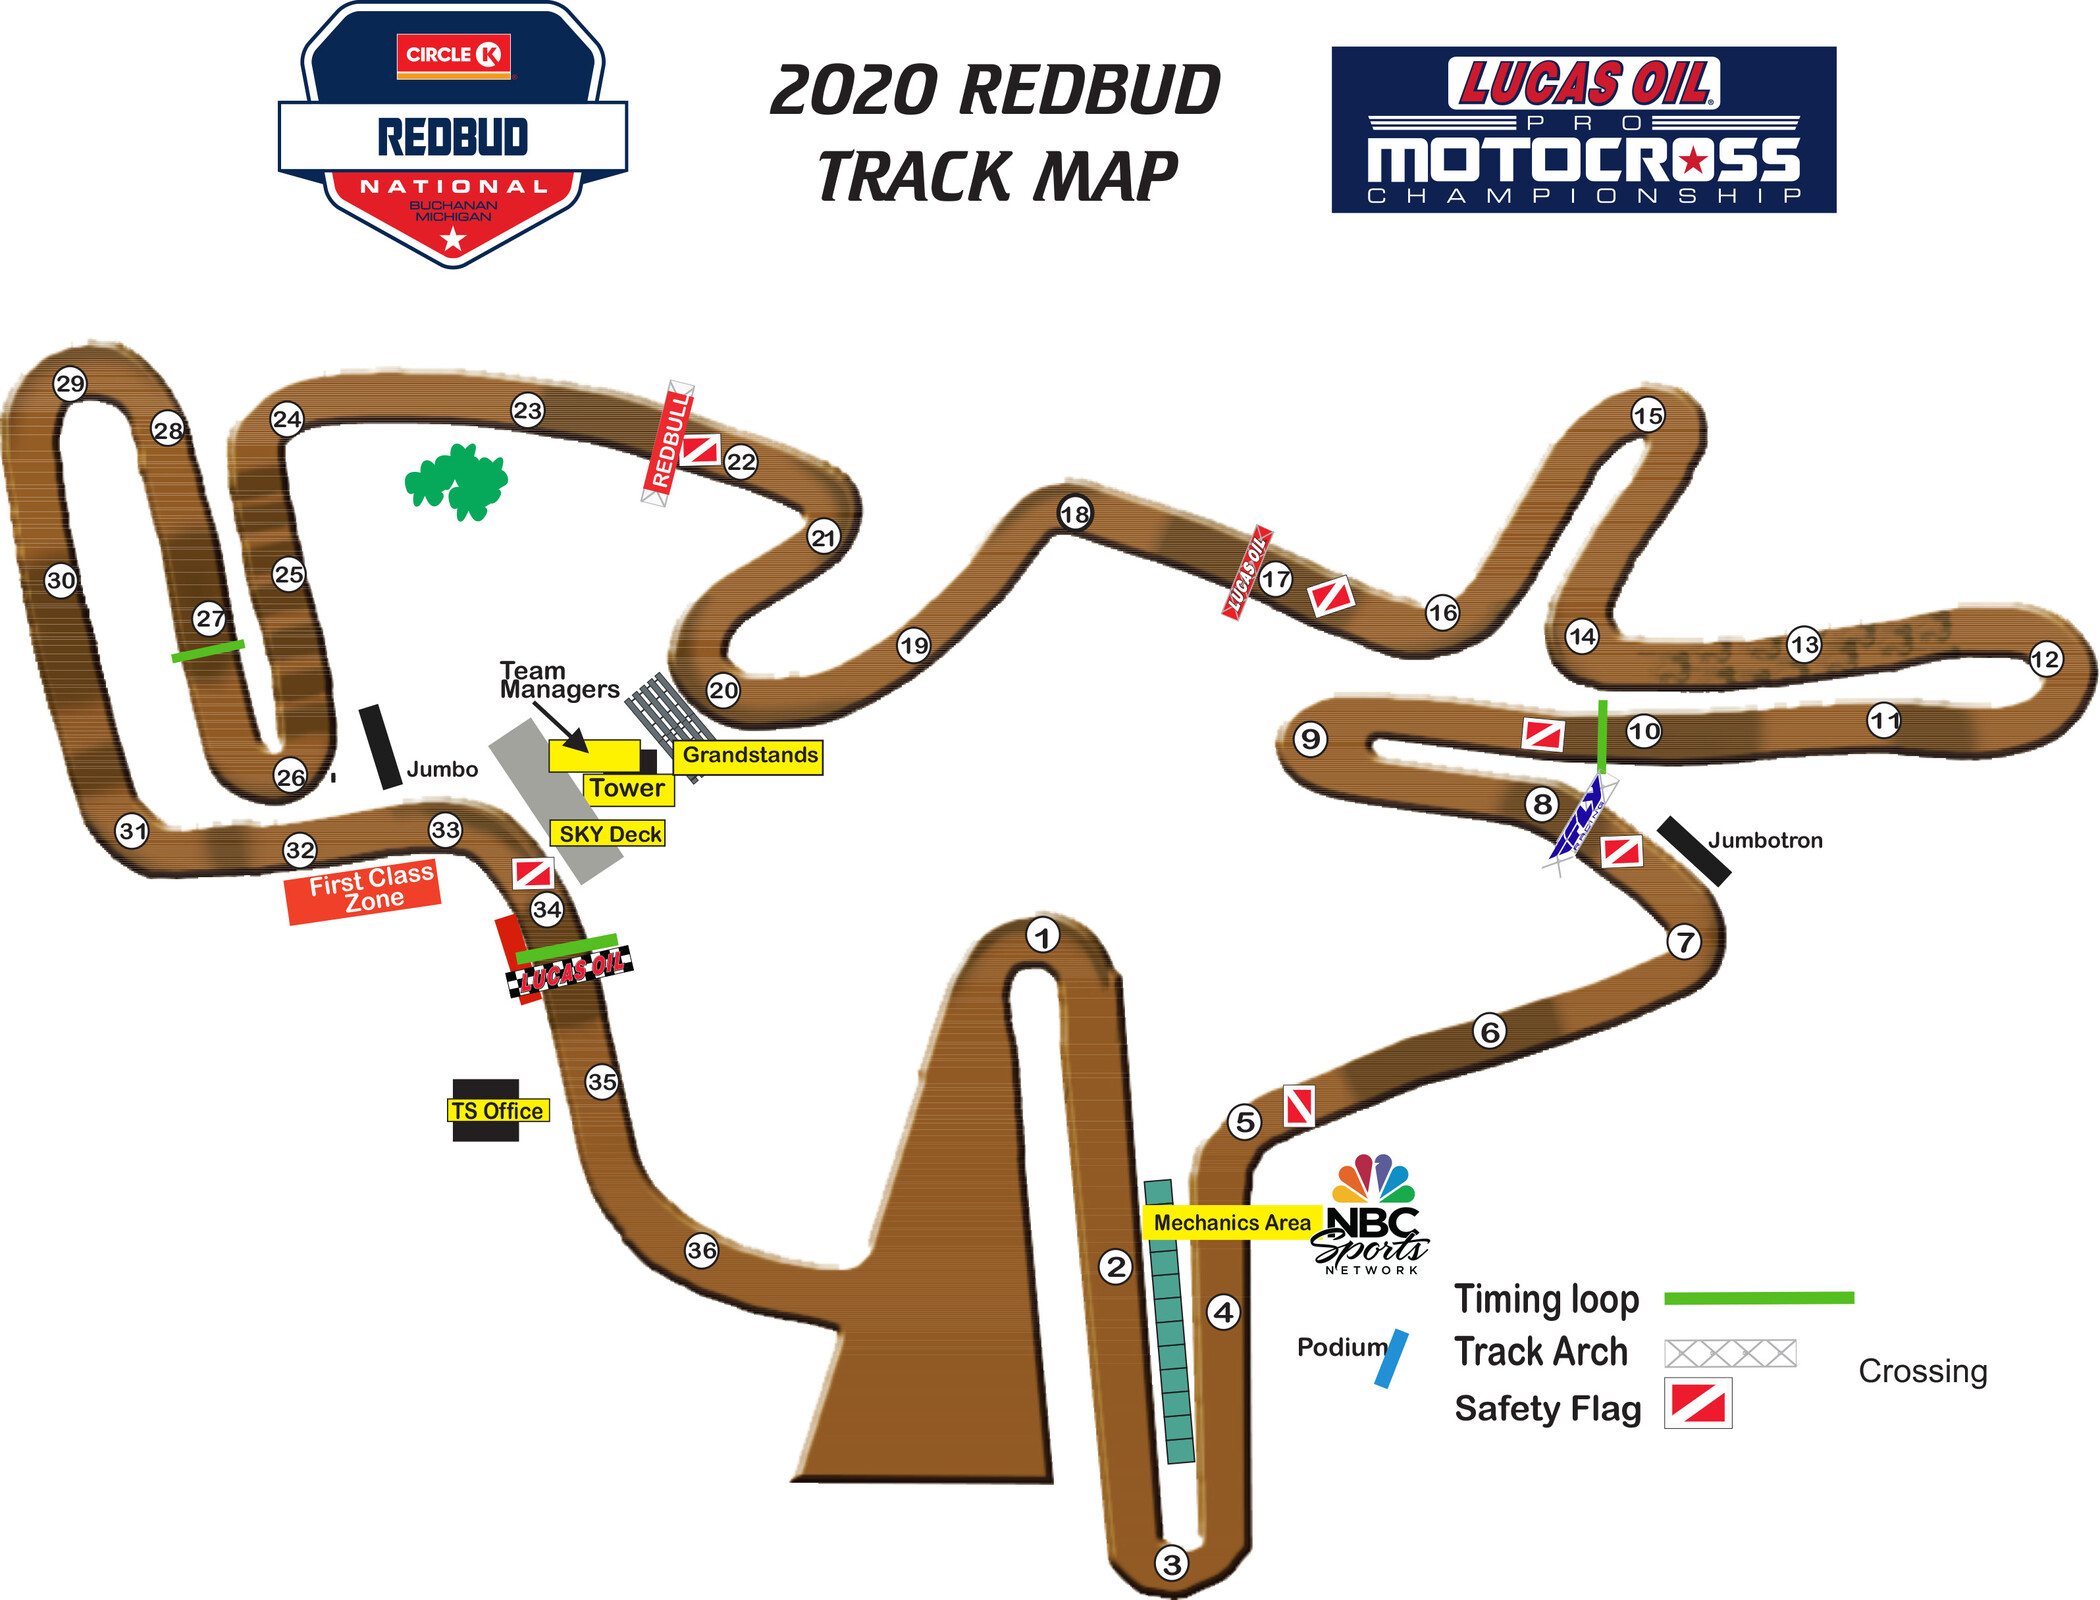 Watch 2020 RedBud 1 and 2 Pro Motocross, MXGP of Italy on TV Racer X